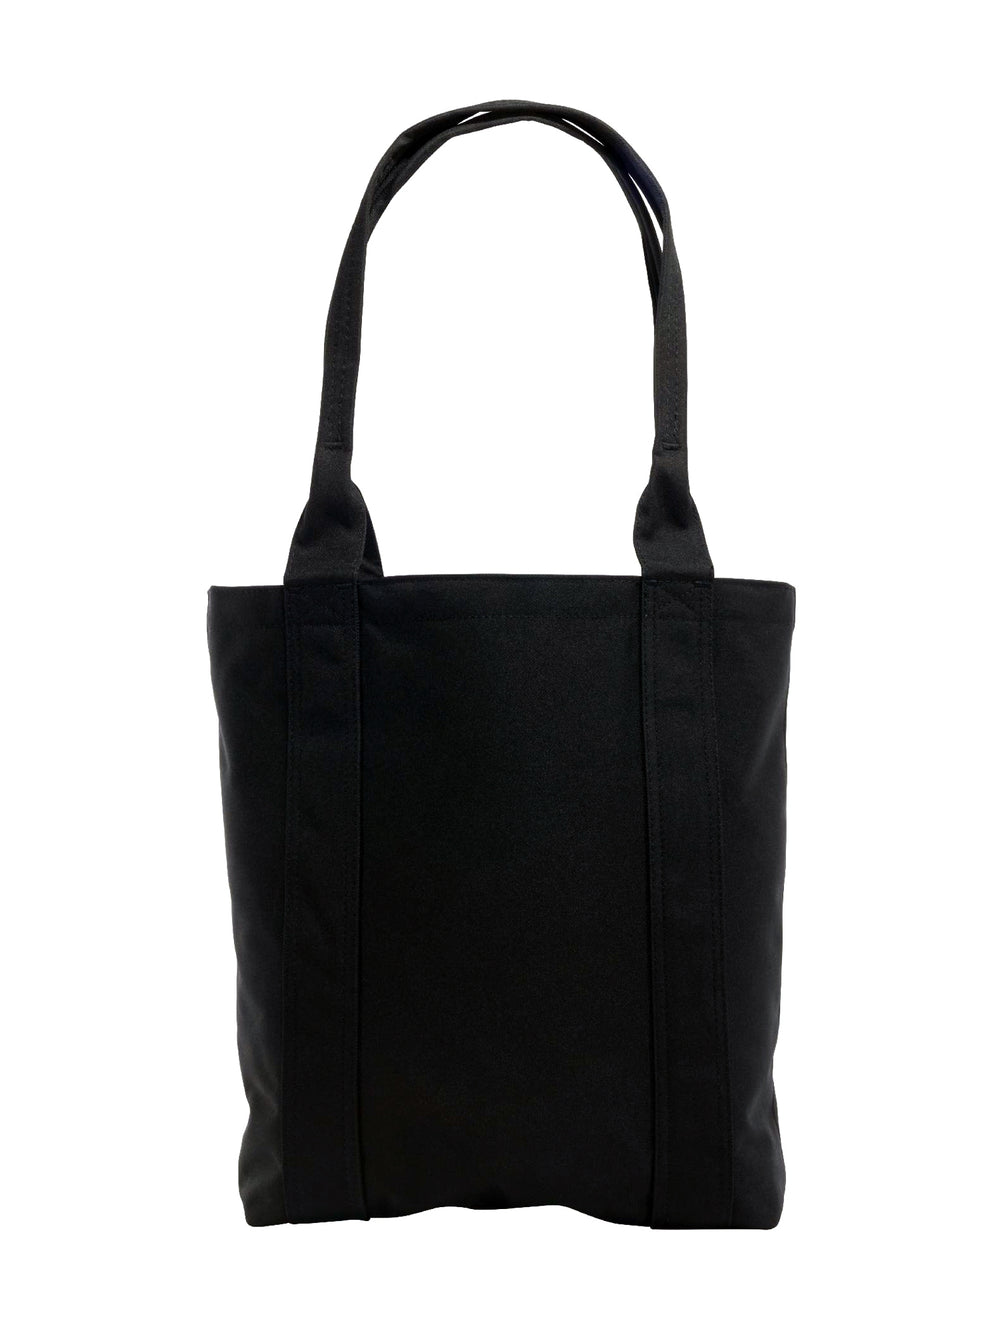 CARHARTT VERTICAL OPEN TOTE - CLEARANCE